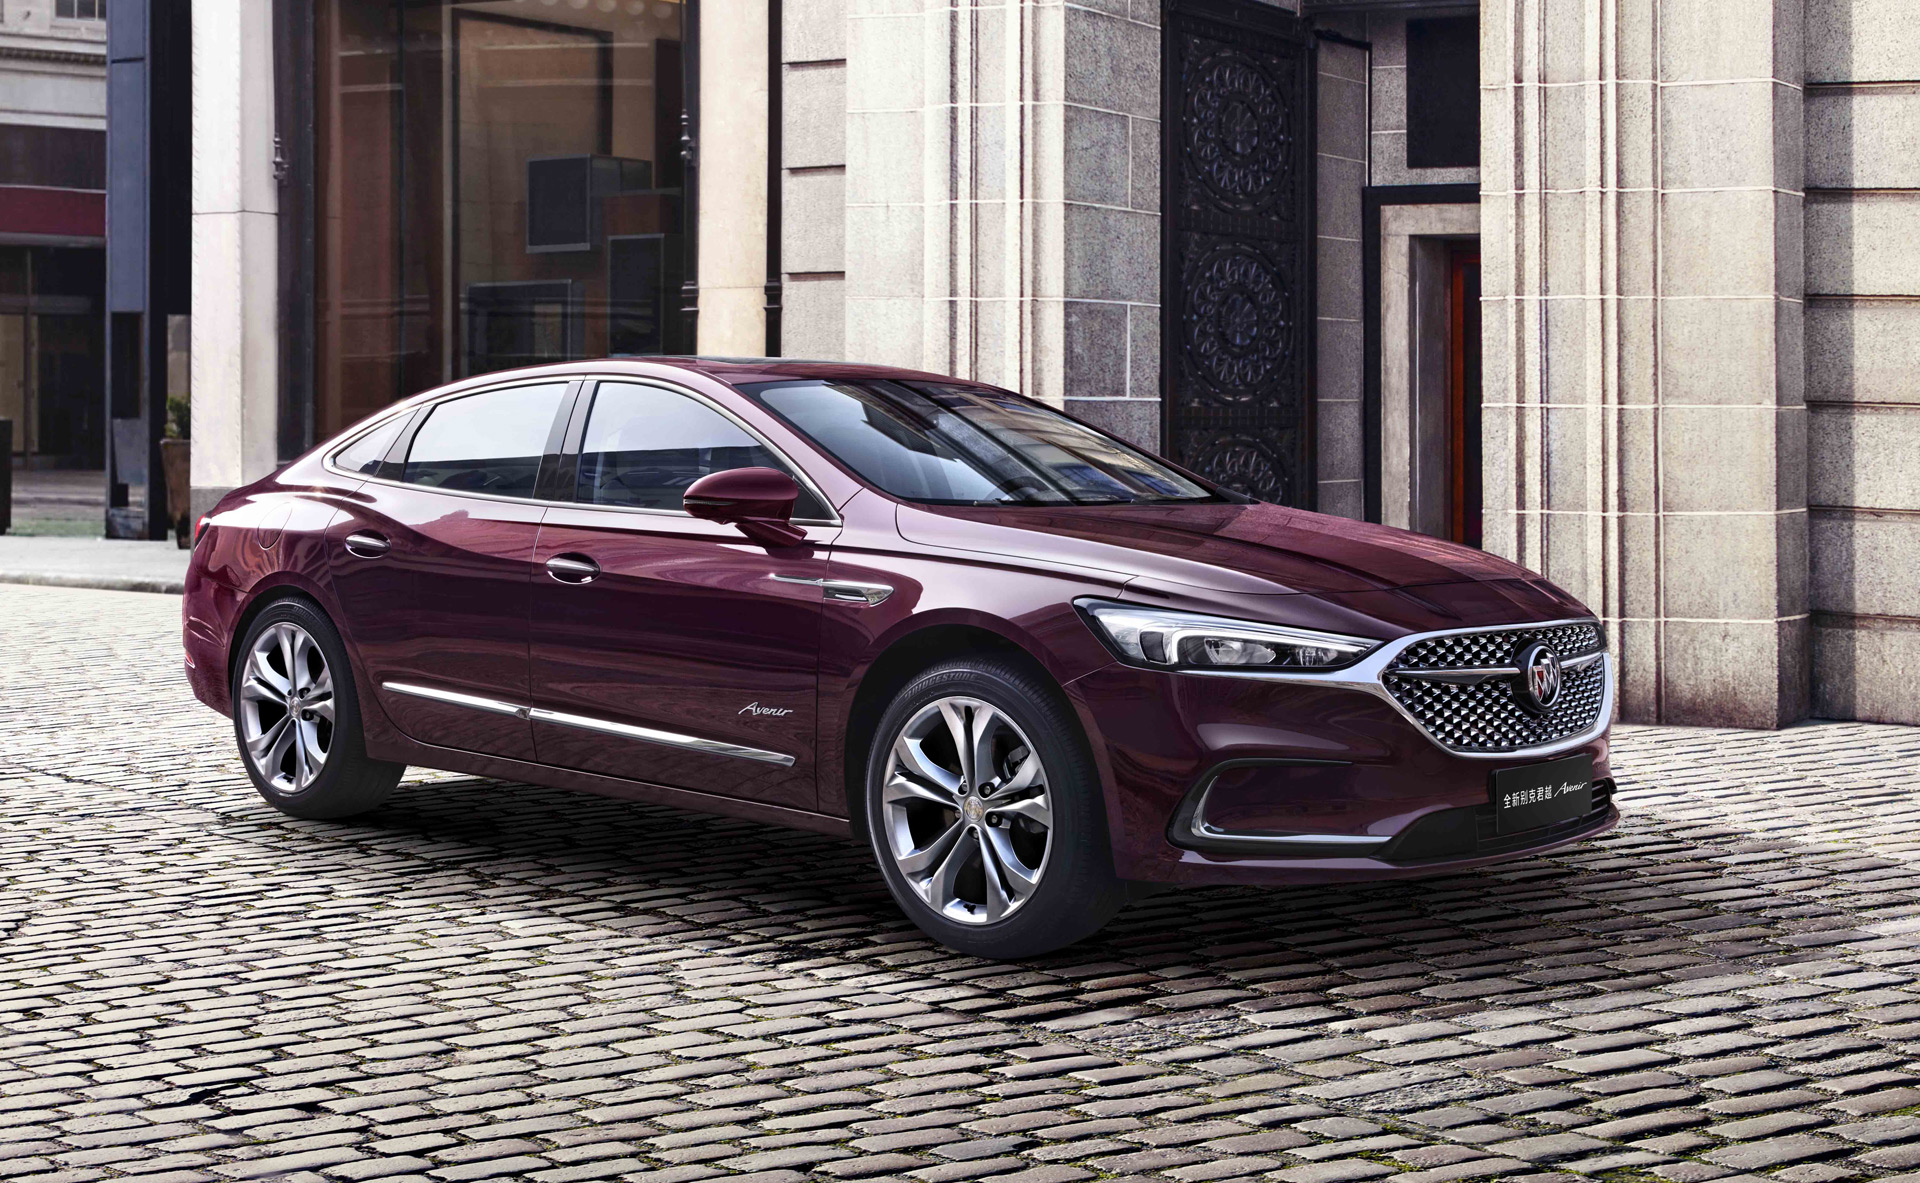 2020 Buick LaCrosse made handsome just as it's dropped in US